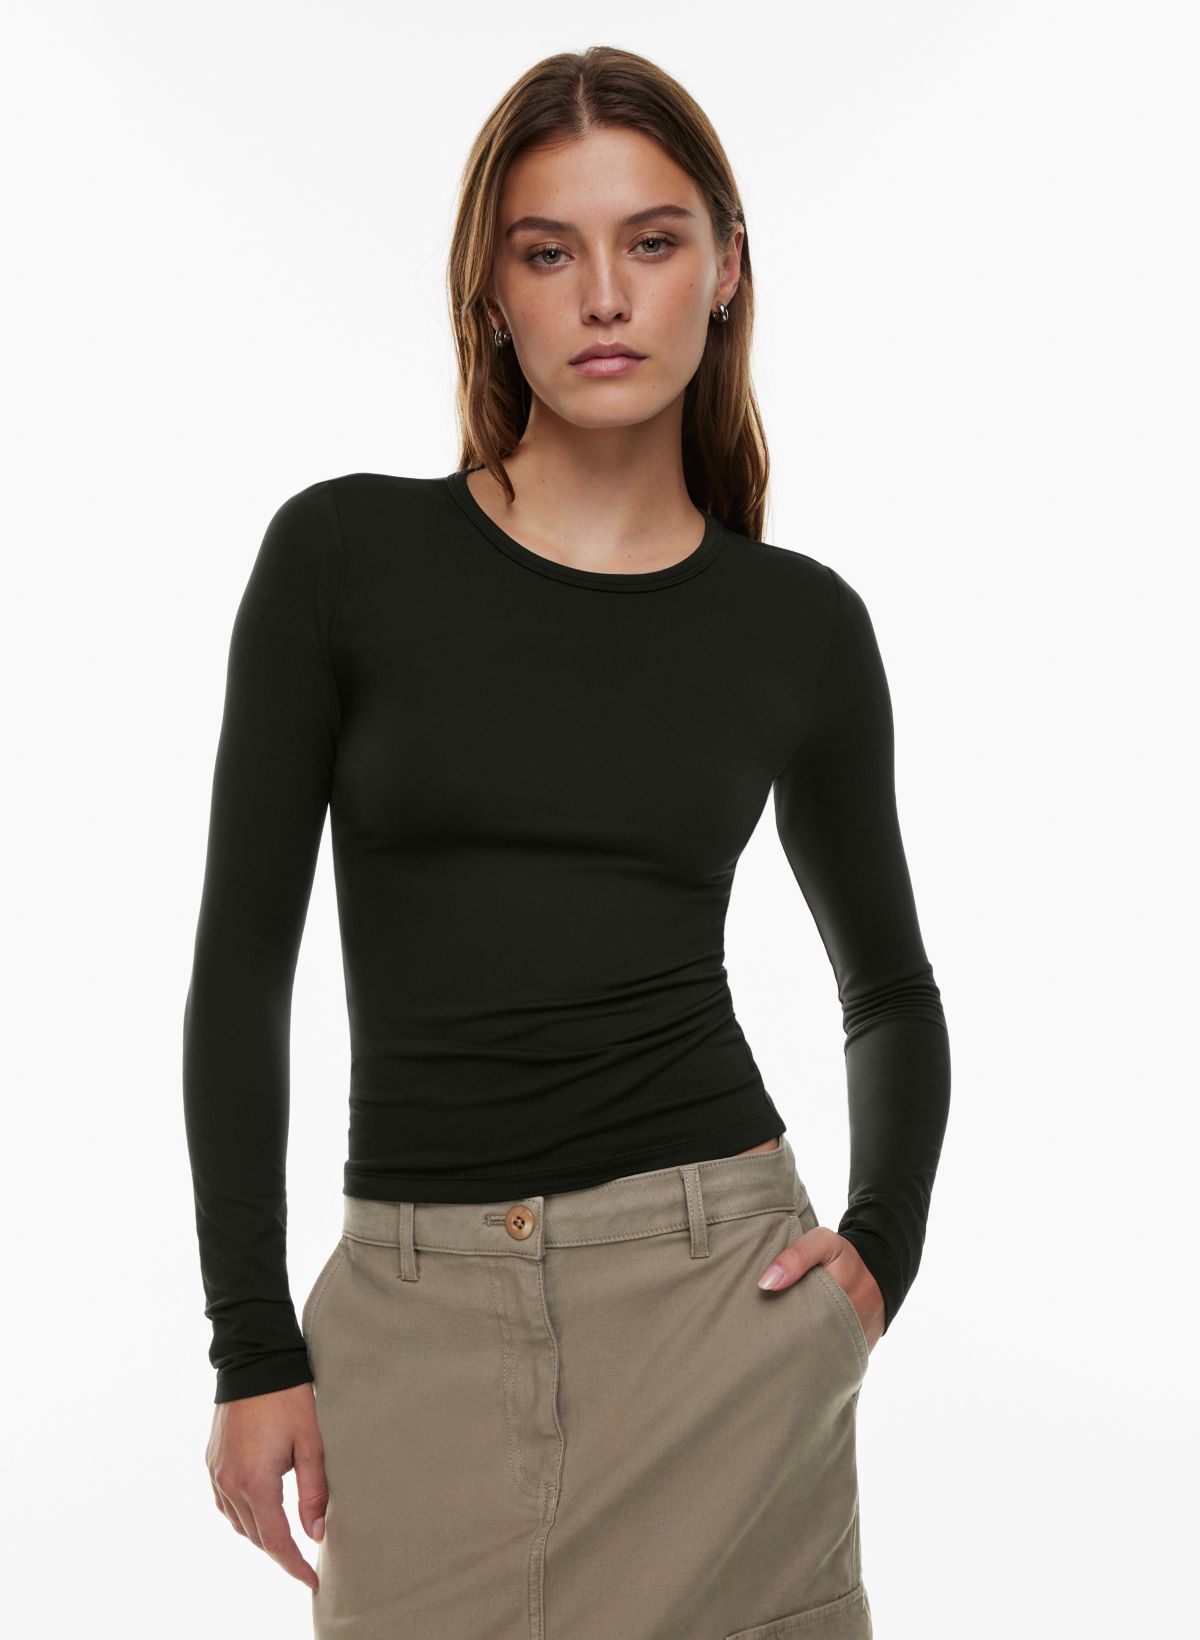 Women's Black Long Sleeve Shirt With Built in Bra -  Canada